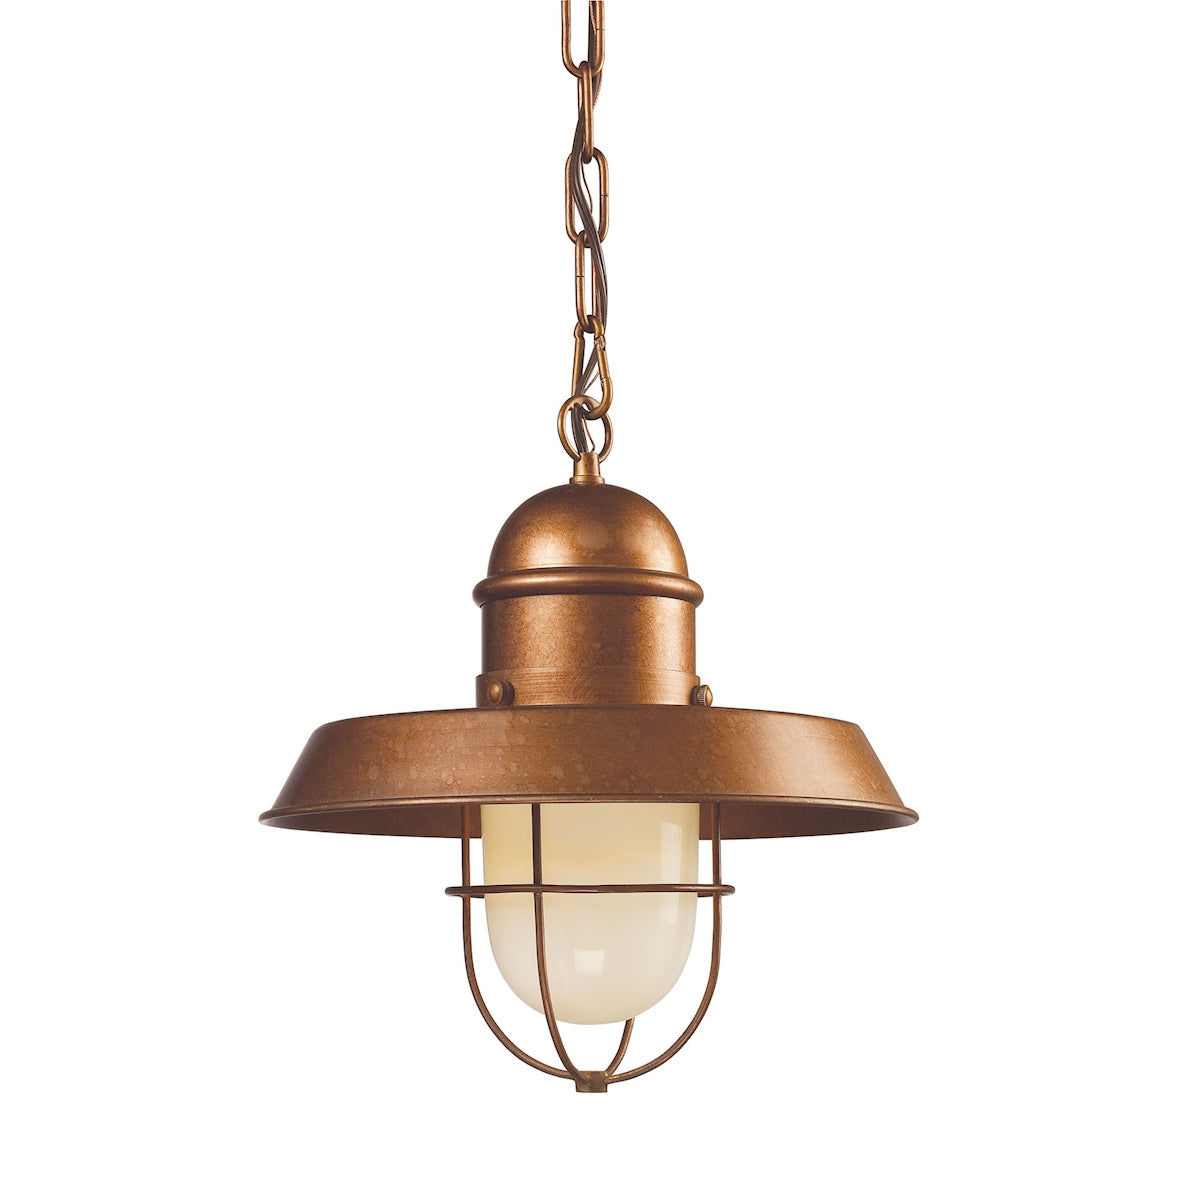 ELK Lighting 65049-1 Farmhouse 1-Light Mini Pendant in Bellwether Copper with Matching Shade